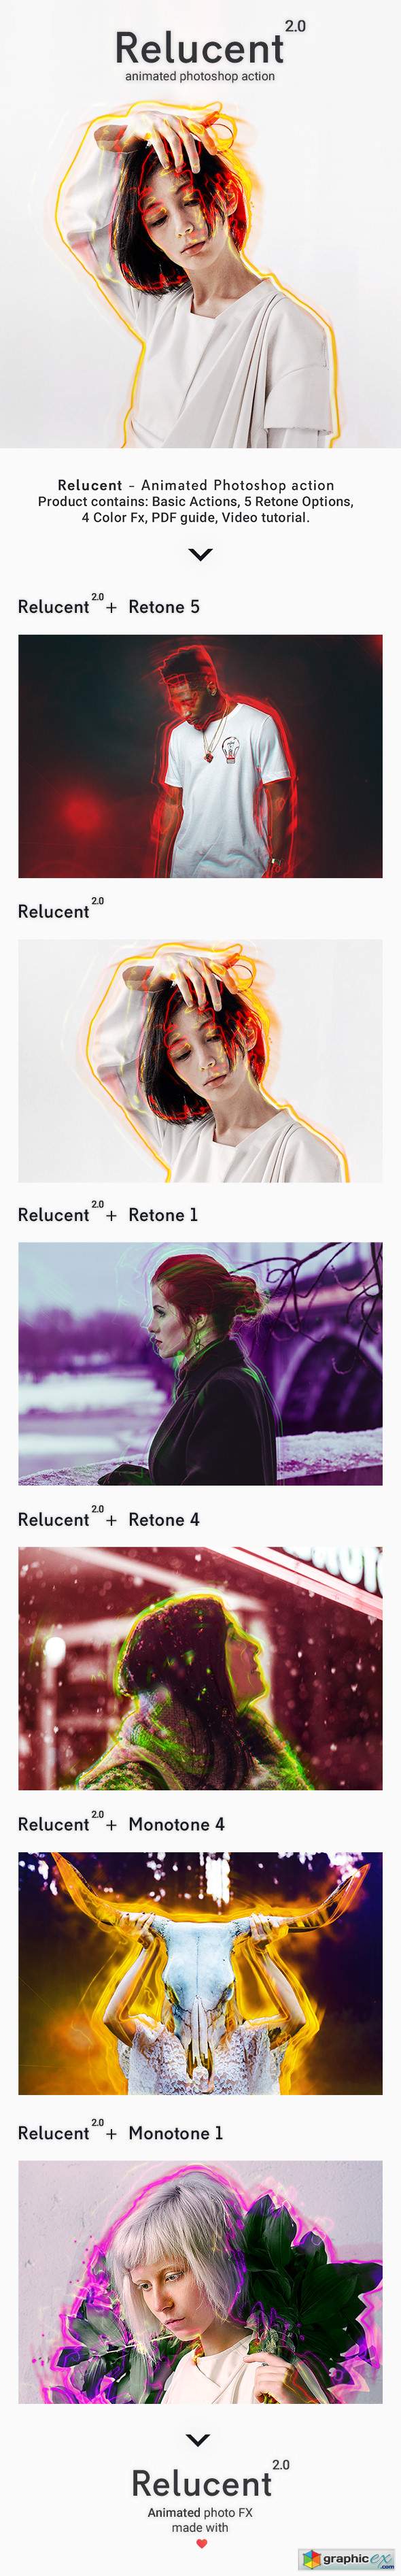 Animated Relucent 2.0 - Photoshop Action